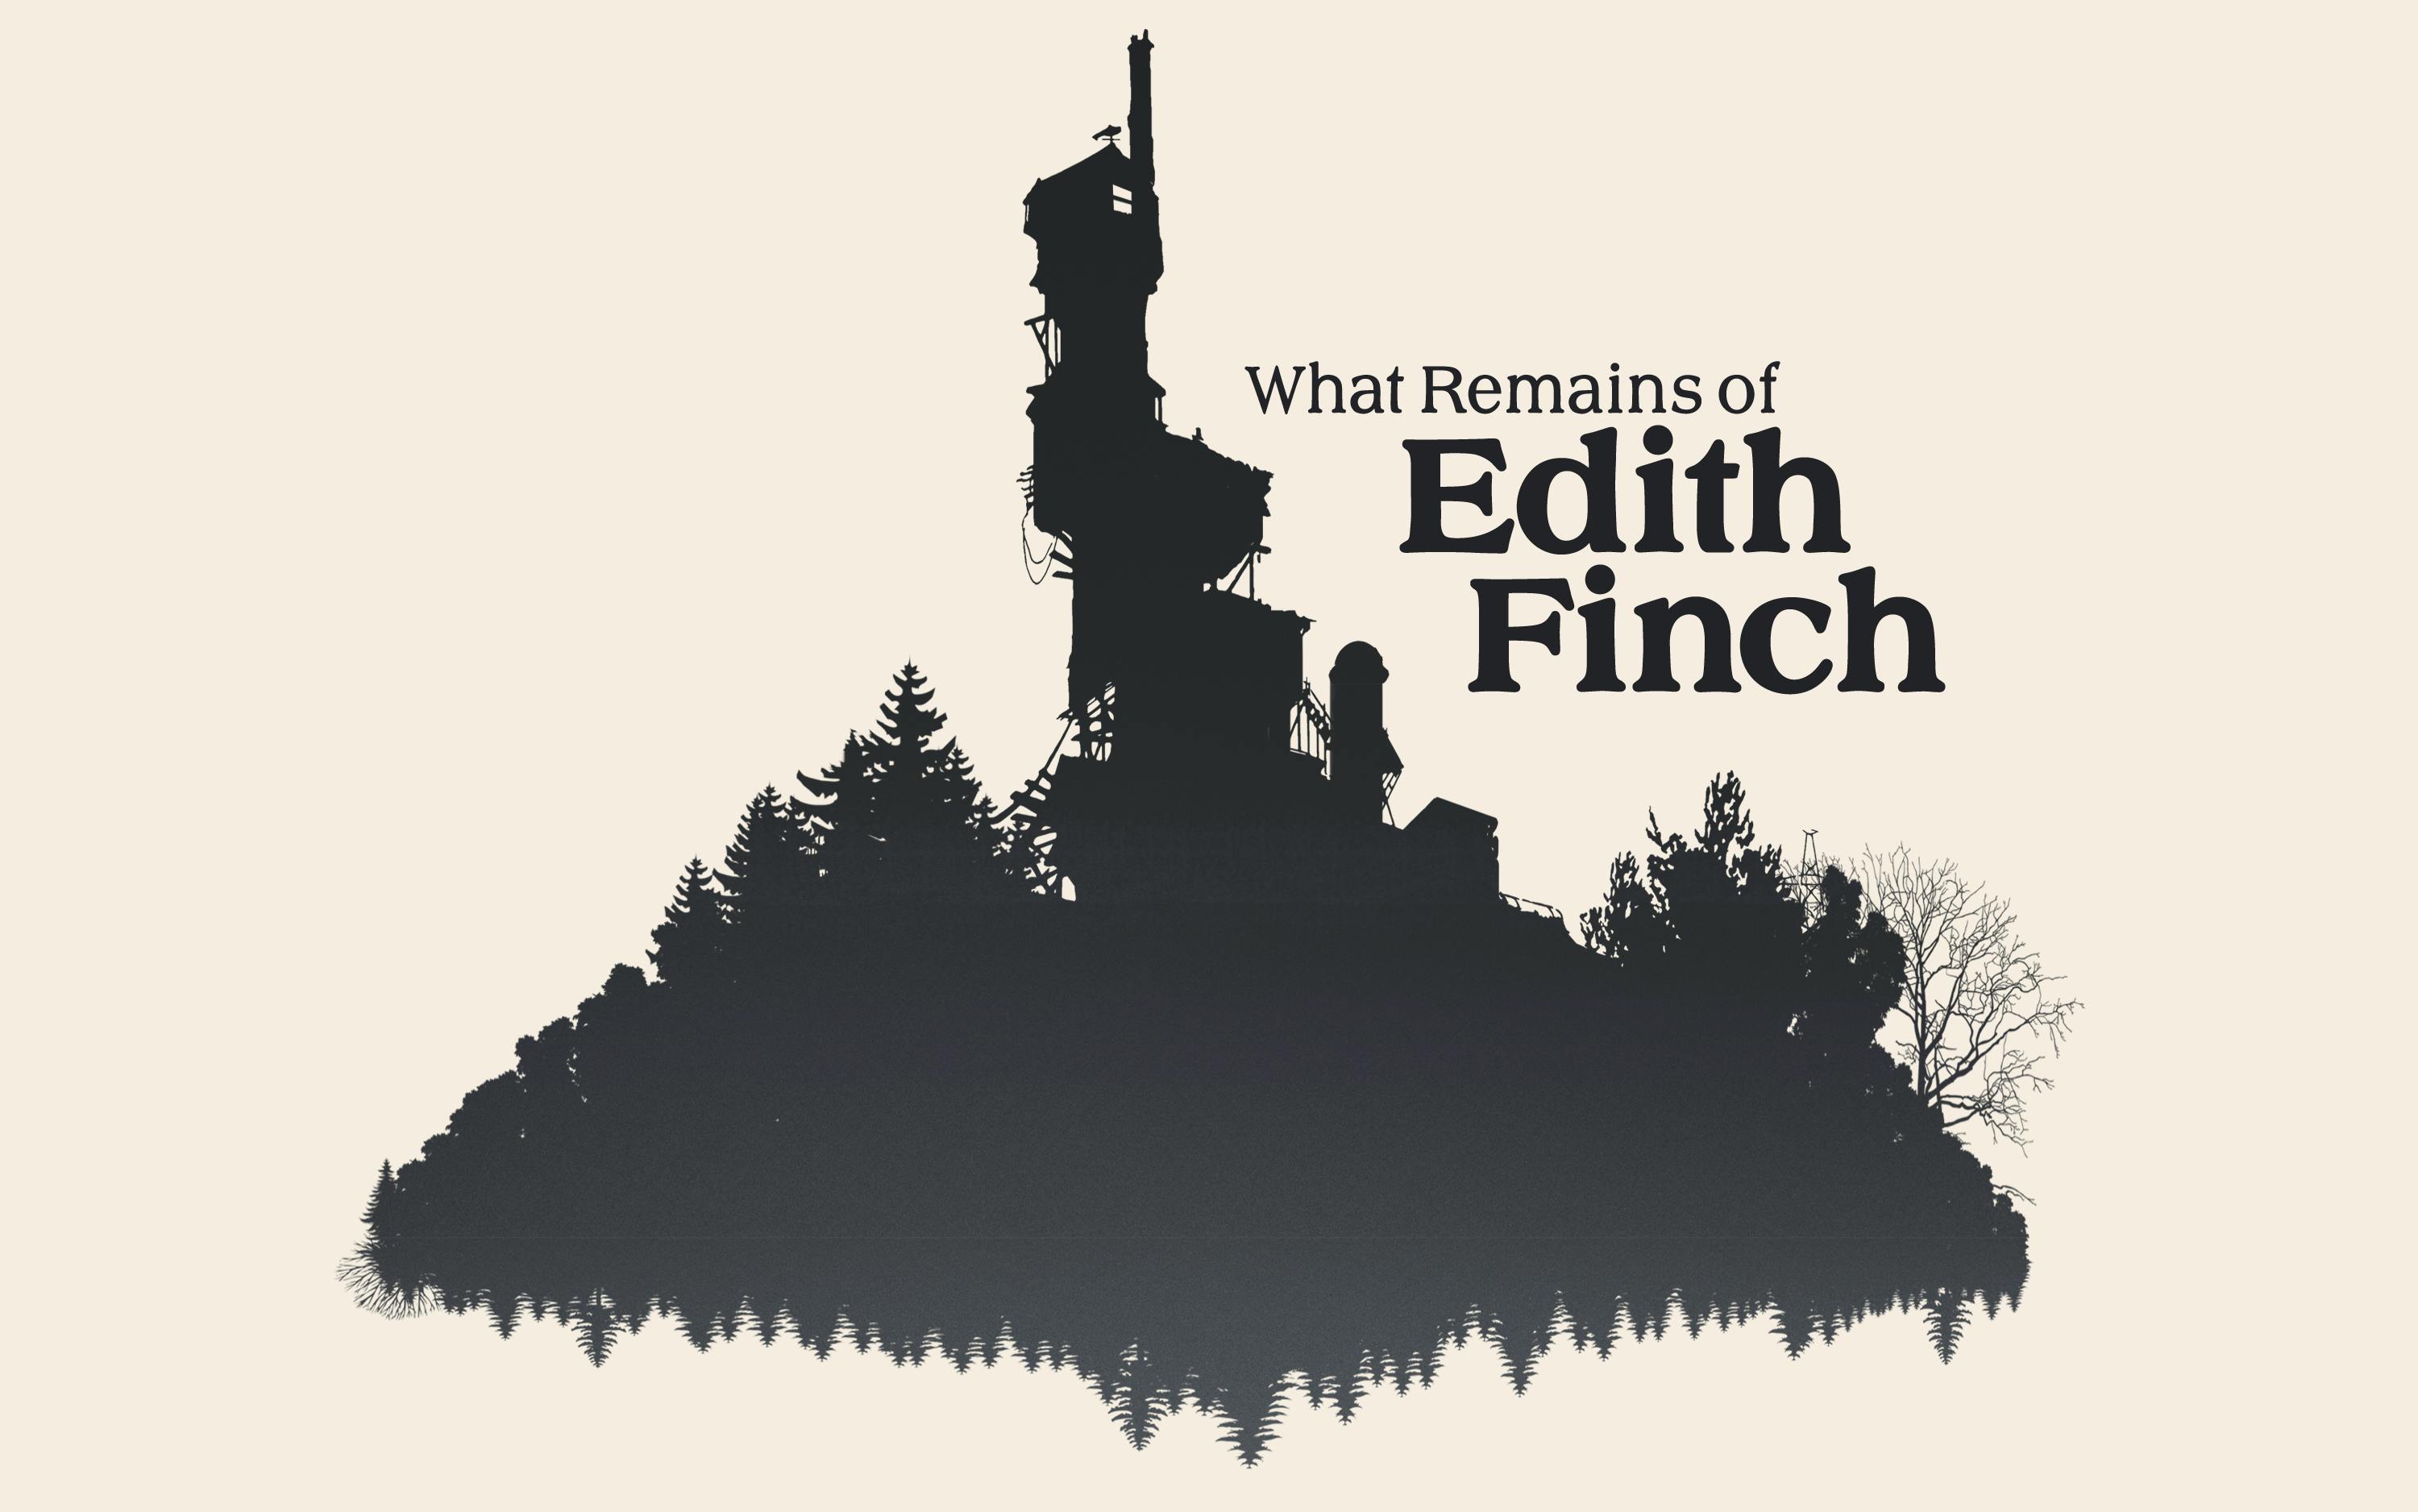 best video games 2017 : What Remains of Edith Finch